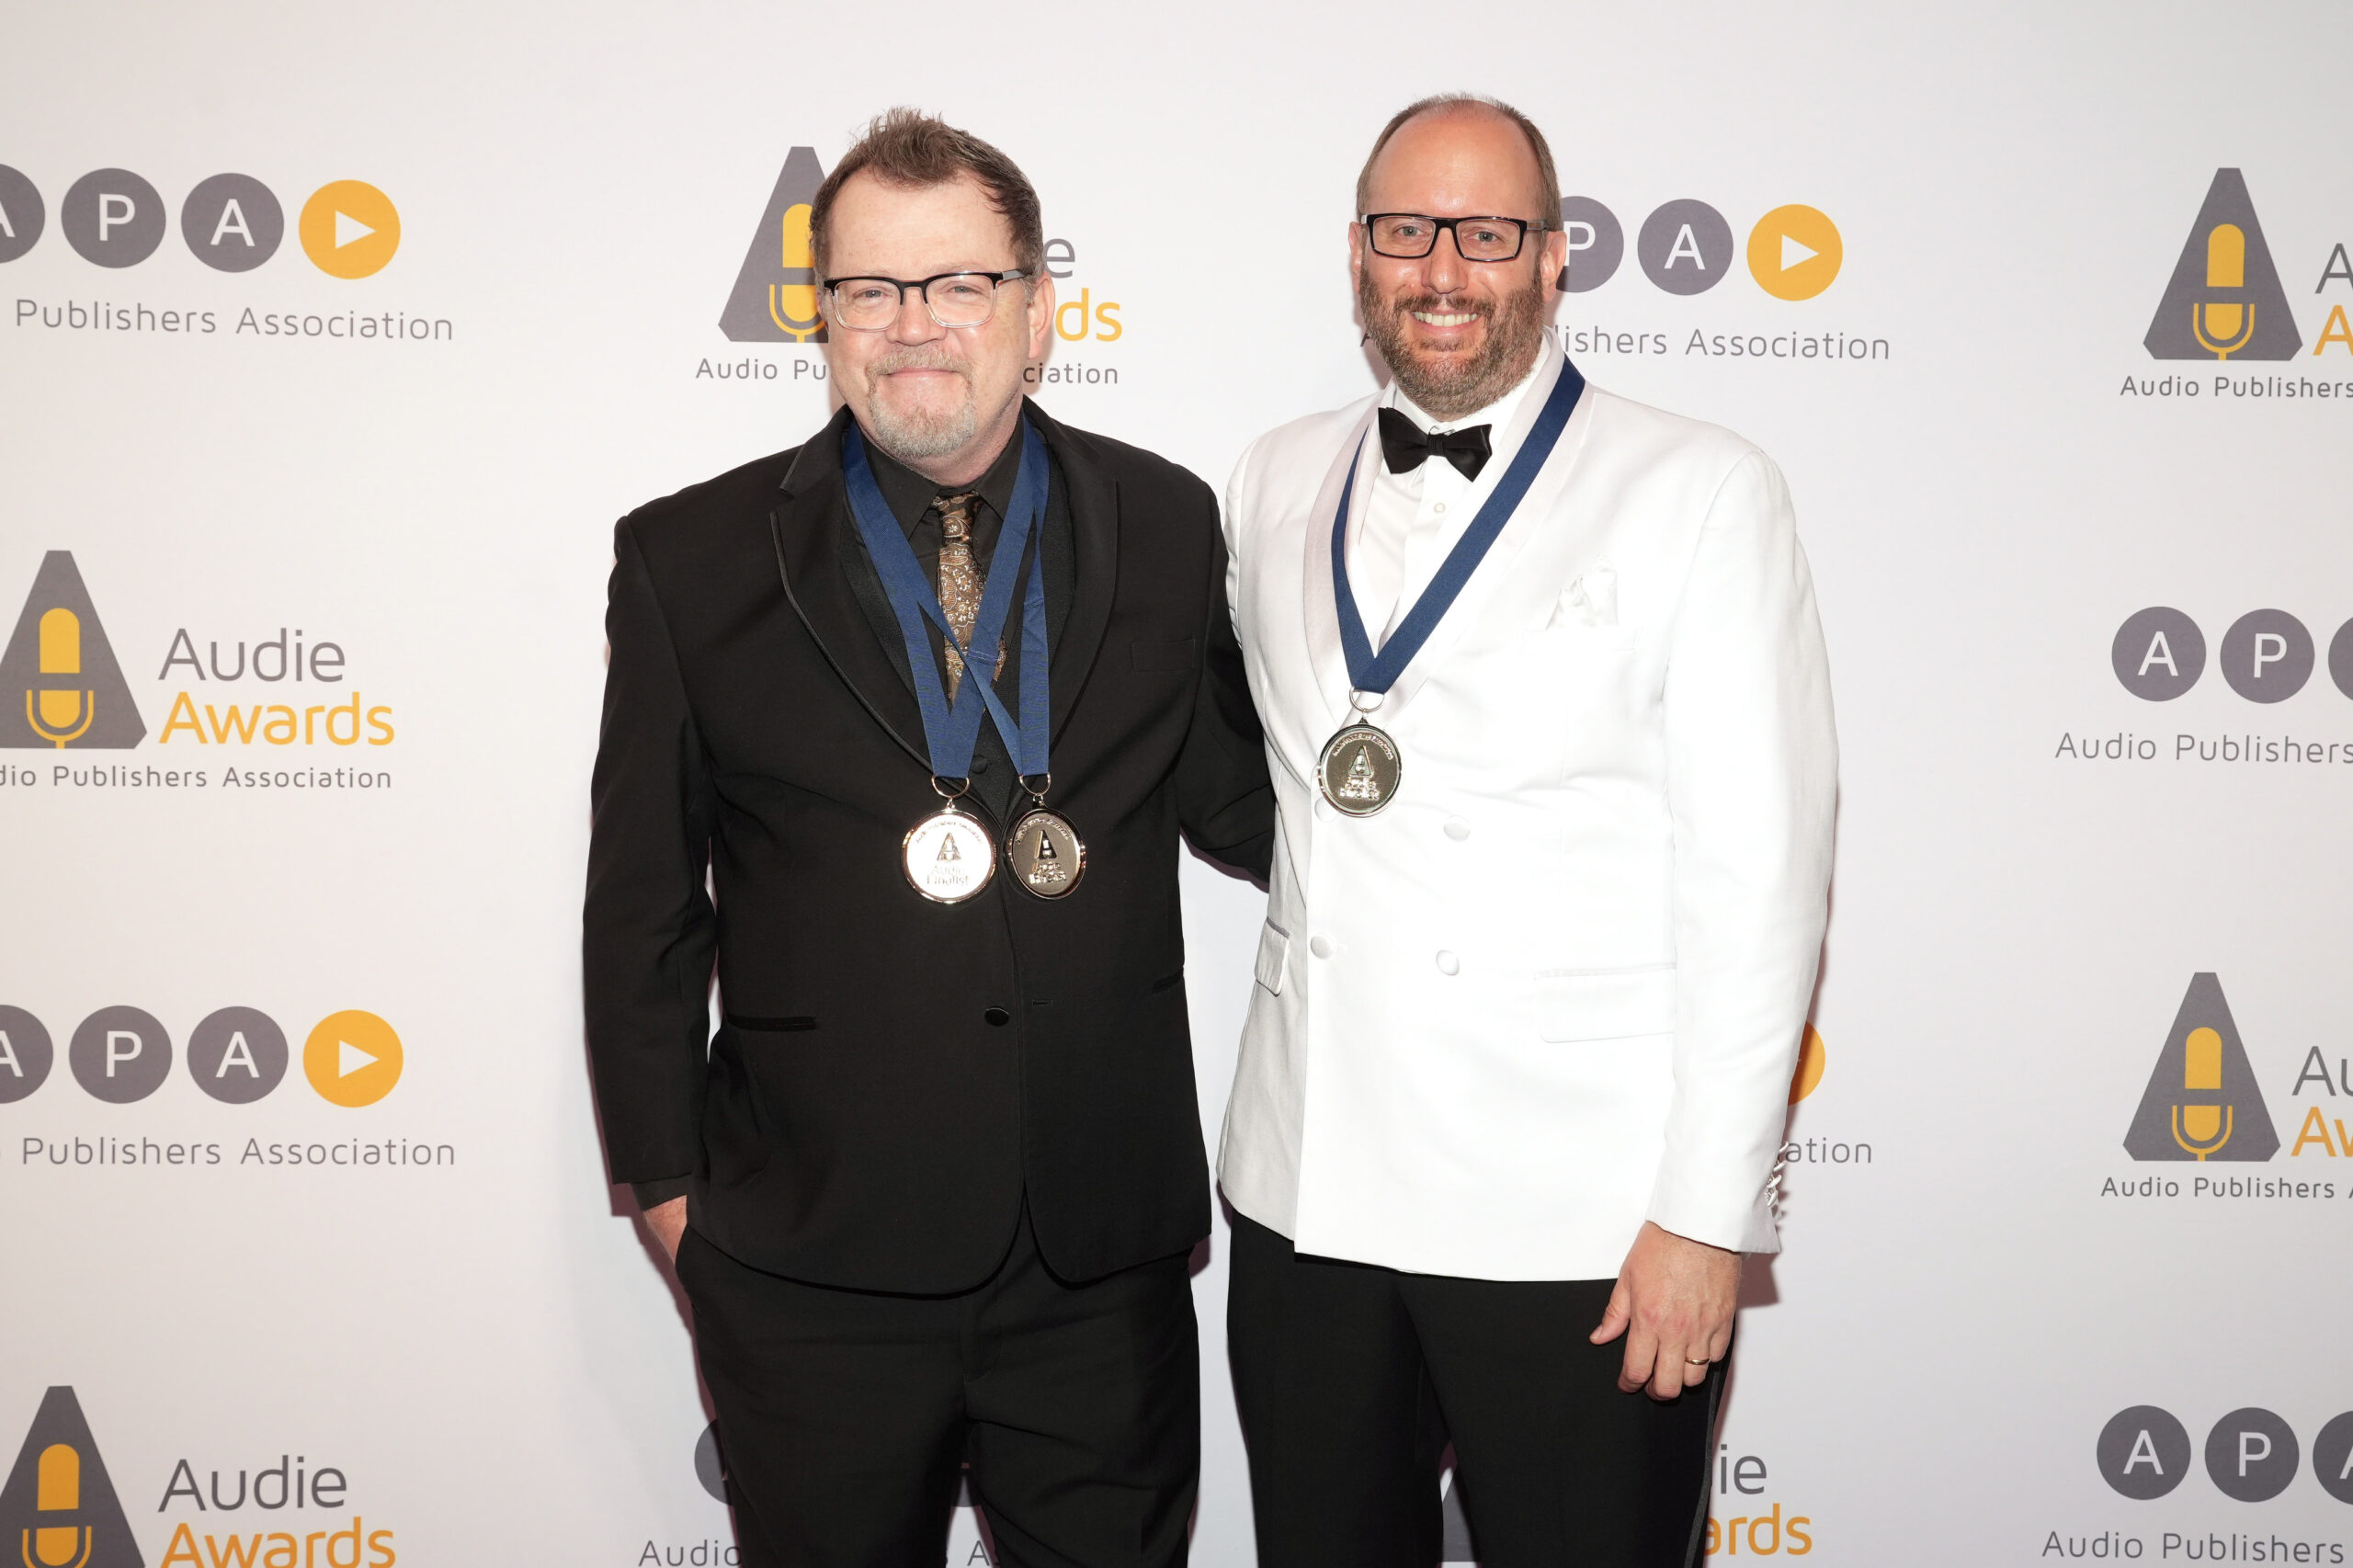 NEW YORK, NEW YORK - MARCH 28: Scott Brick and Landon Beach (R) attend the Audio Publishers Association's 2023 Audie Awards at Pier 60, Chelsea Piers on March 28, 2023 in New York City. (Photo by Ilya S. Savenok/Getty Images for Audio Publishers Association)